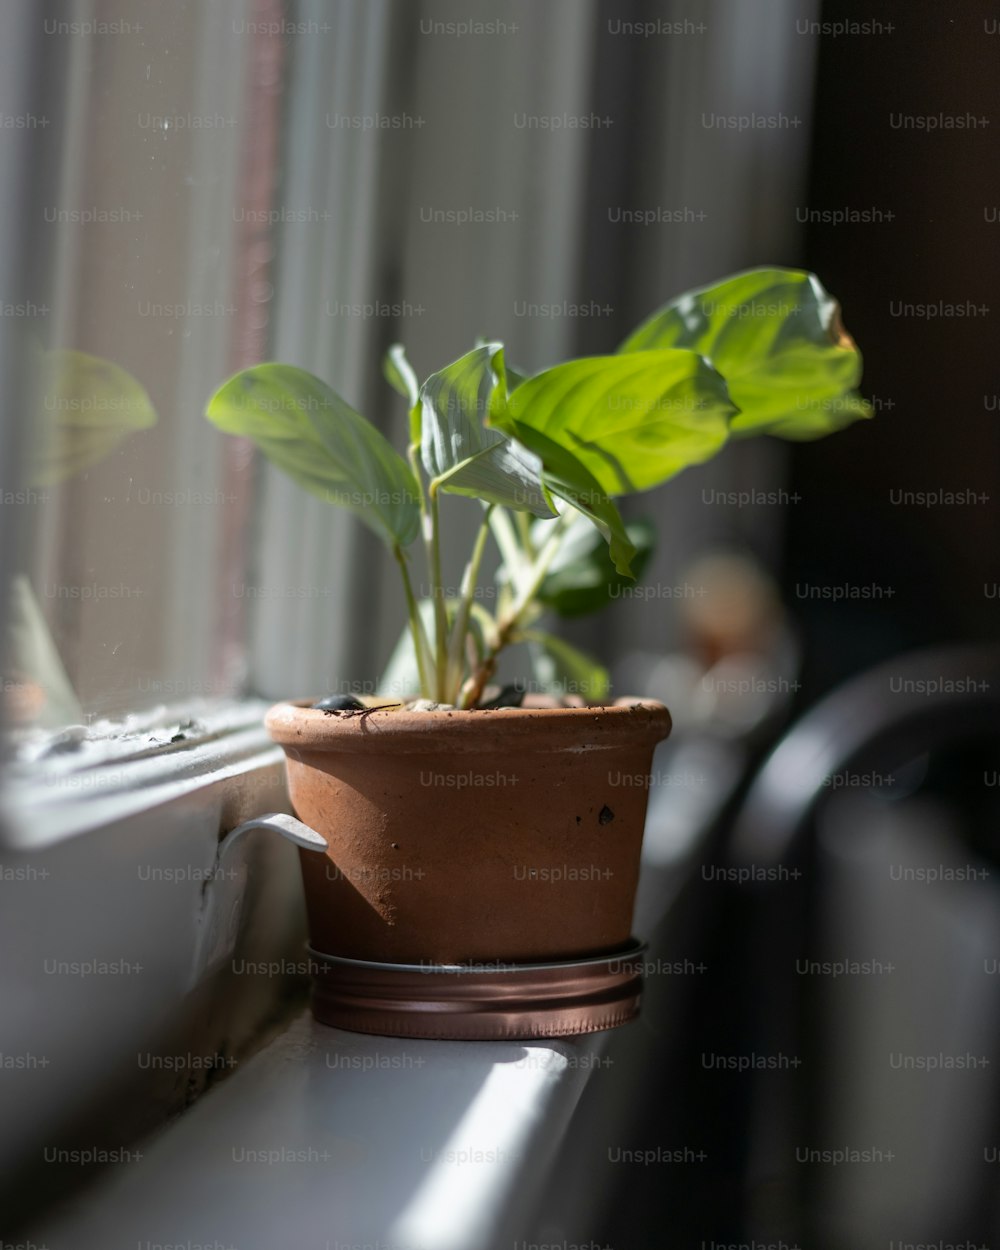 a potted plant sitting on a window sill